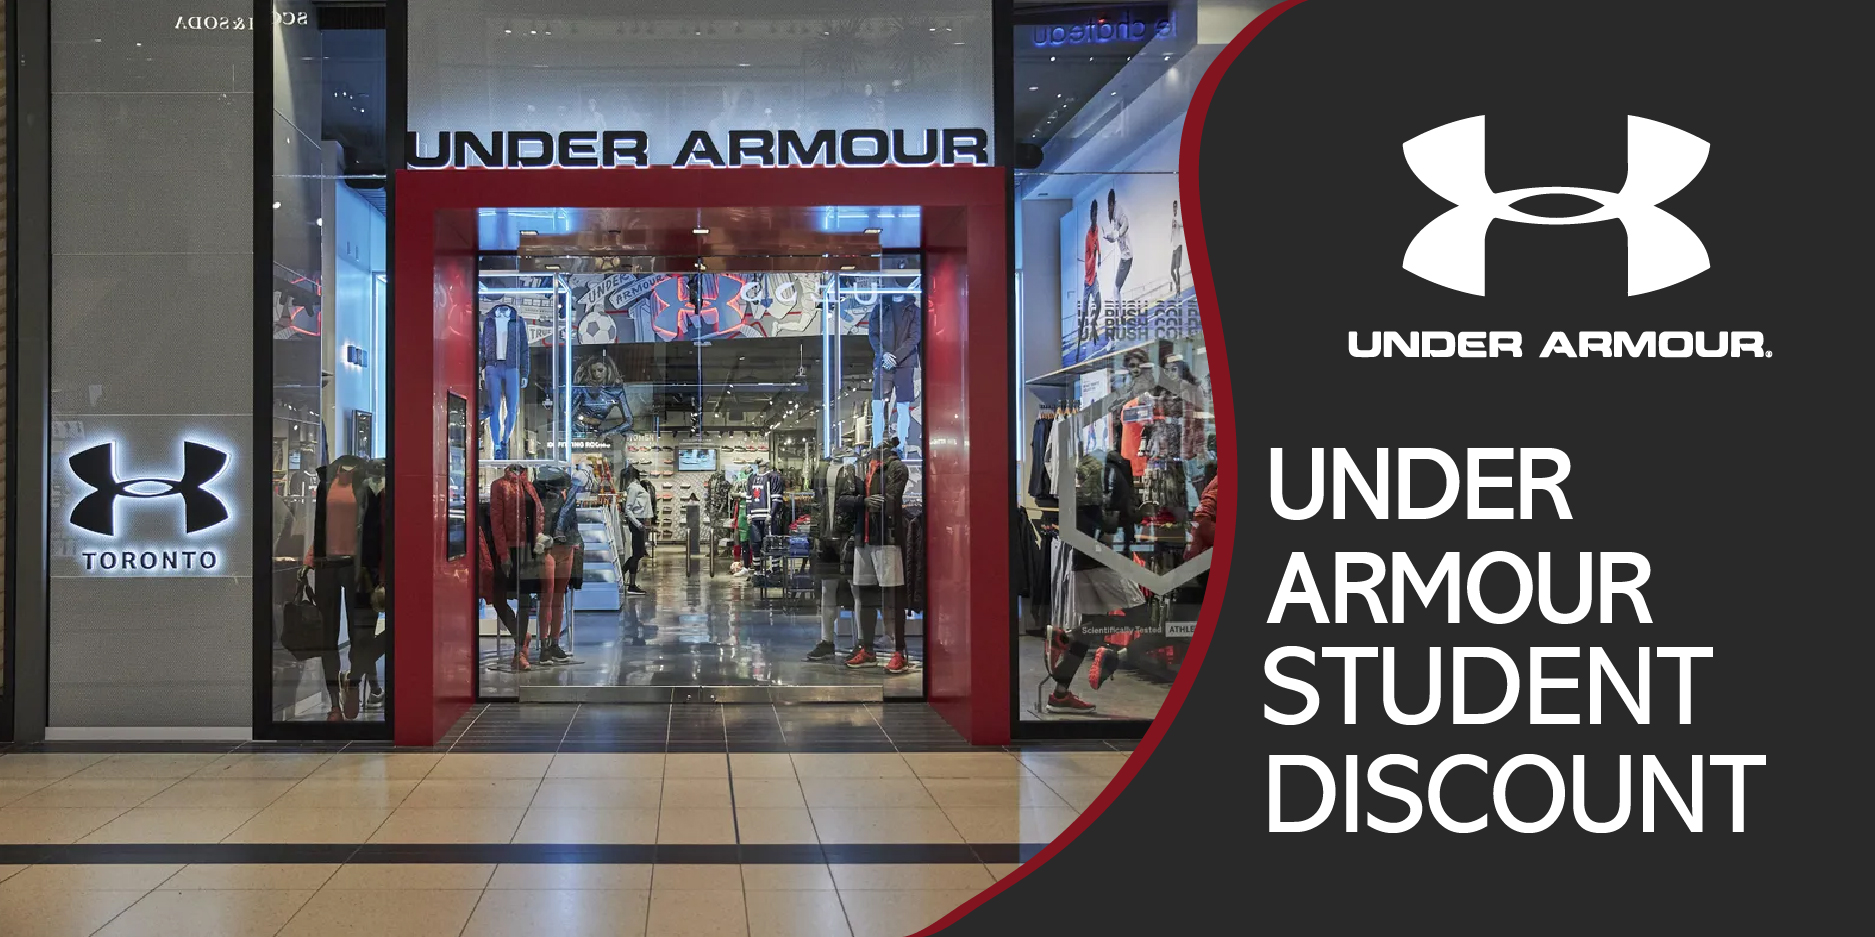 Under Armour Student Discount